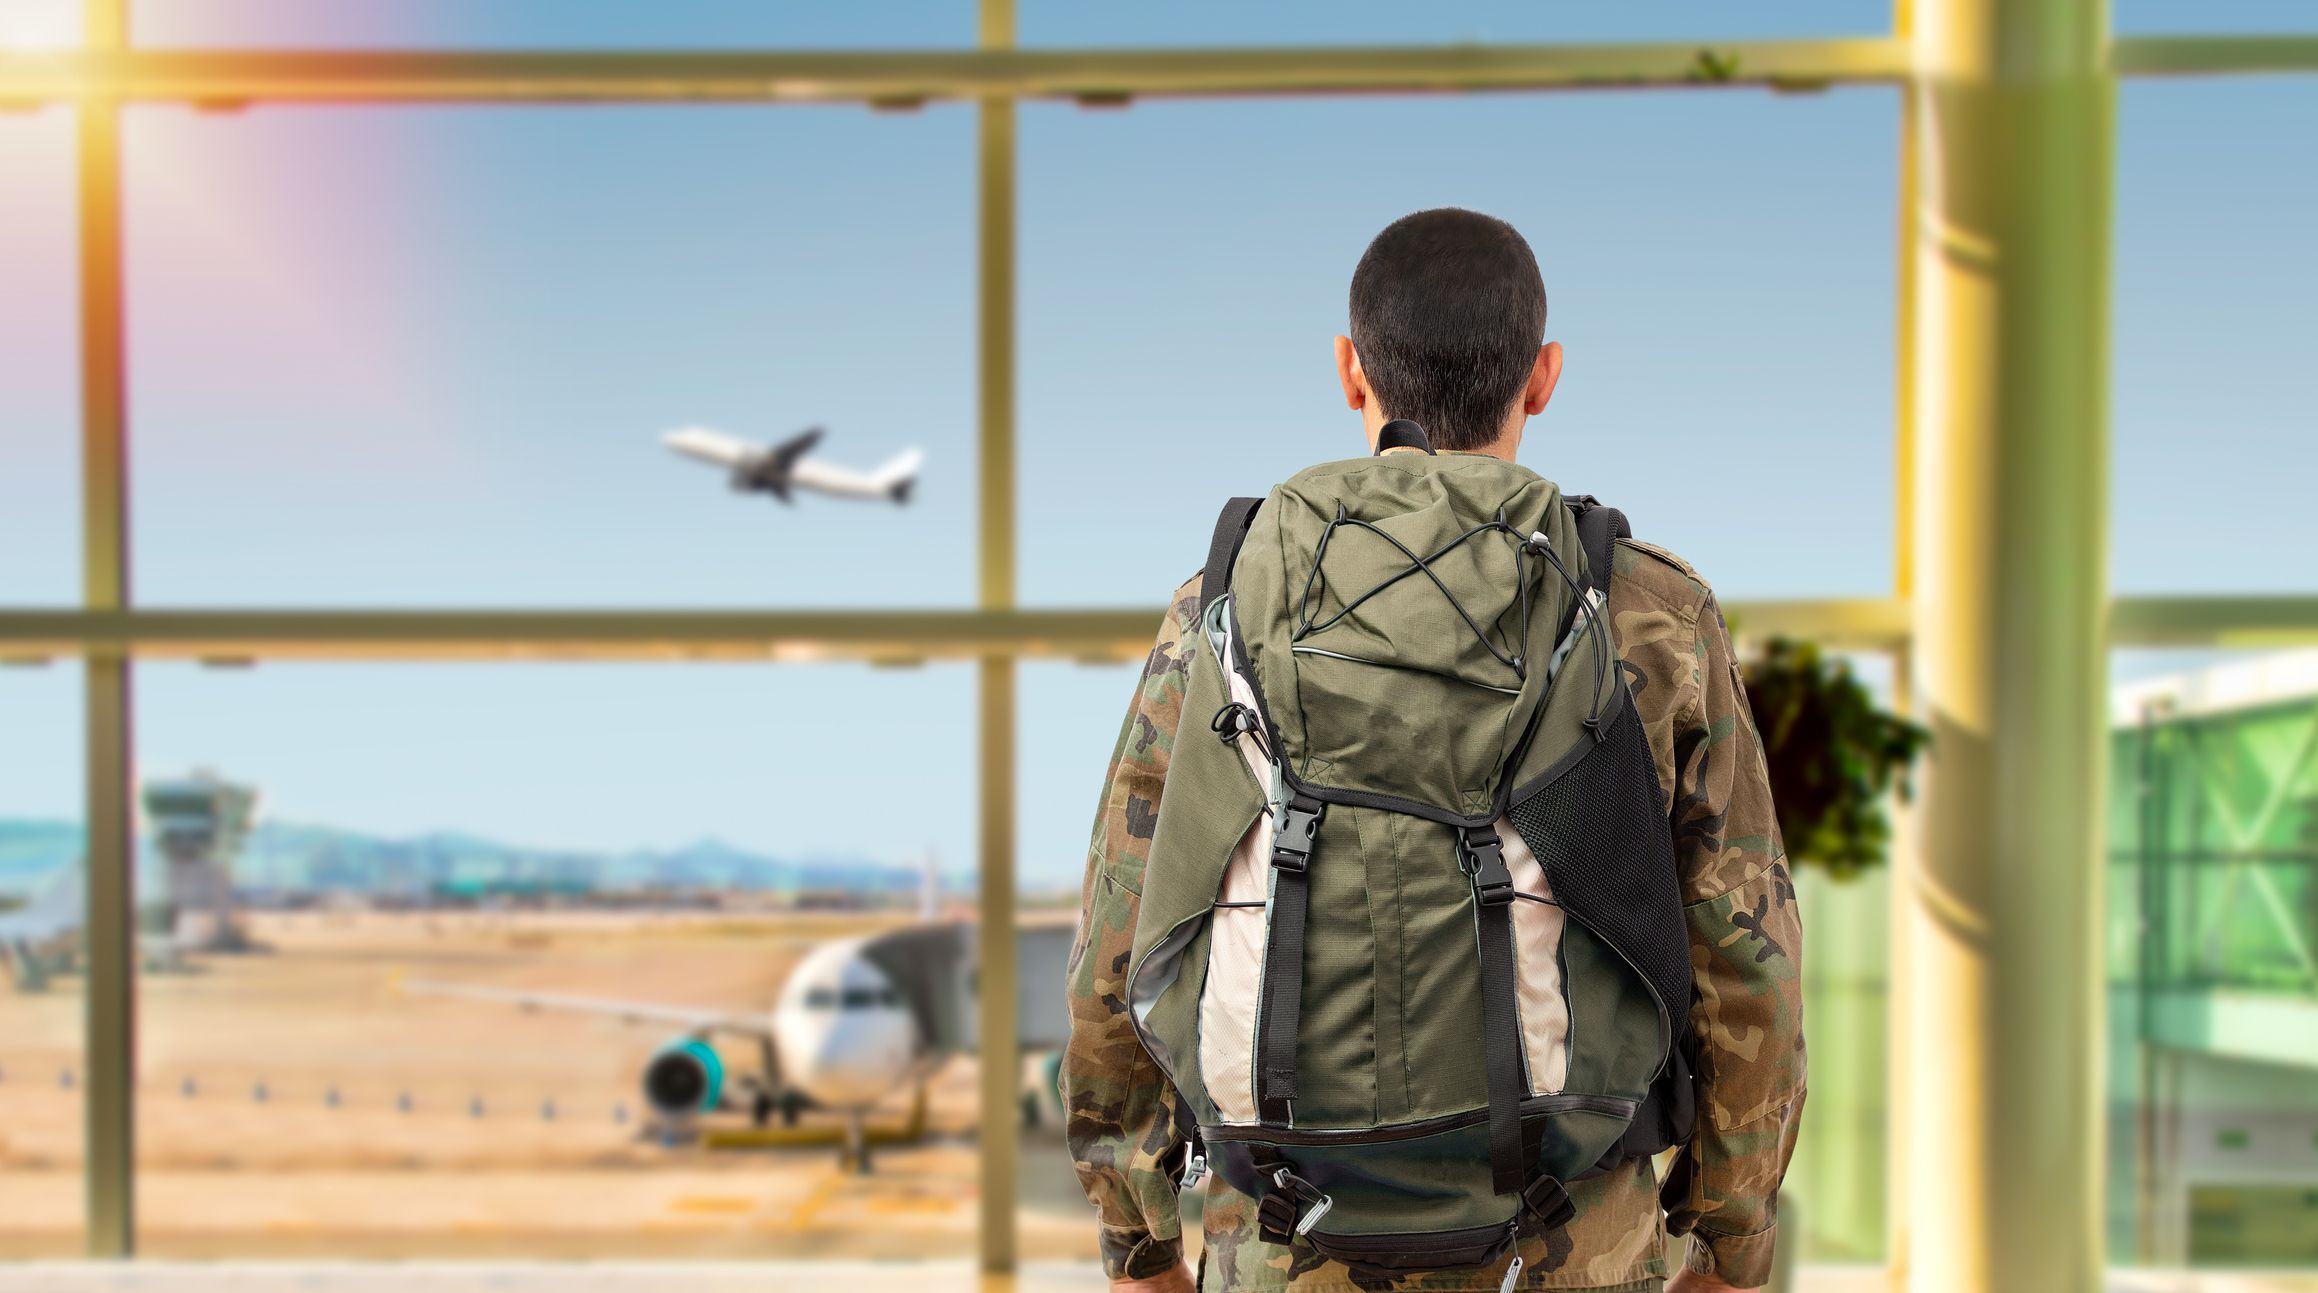 <p>Veterans and their families can travel with <a href="https://www.militaryonesource.mil/benefits/space-a-travel/">Space-A flights</a> – formally known as Military Airlift Command or MAC flights – to take advantage of cheaper flights. Military flights can be more unpredictable than standard commercial flights, but for travelers who have room for flexibility and a desire to save money, they are worth looking into.</p>